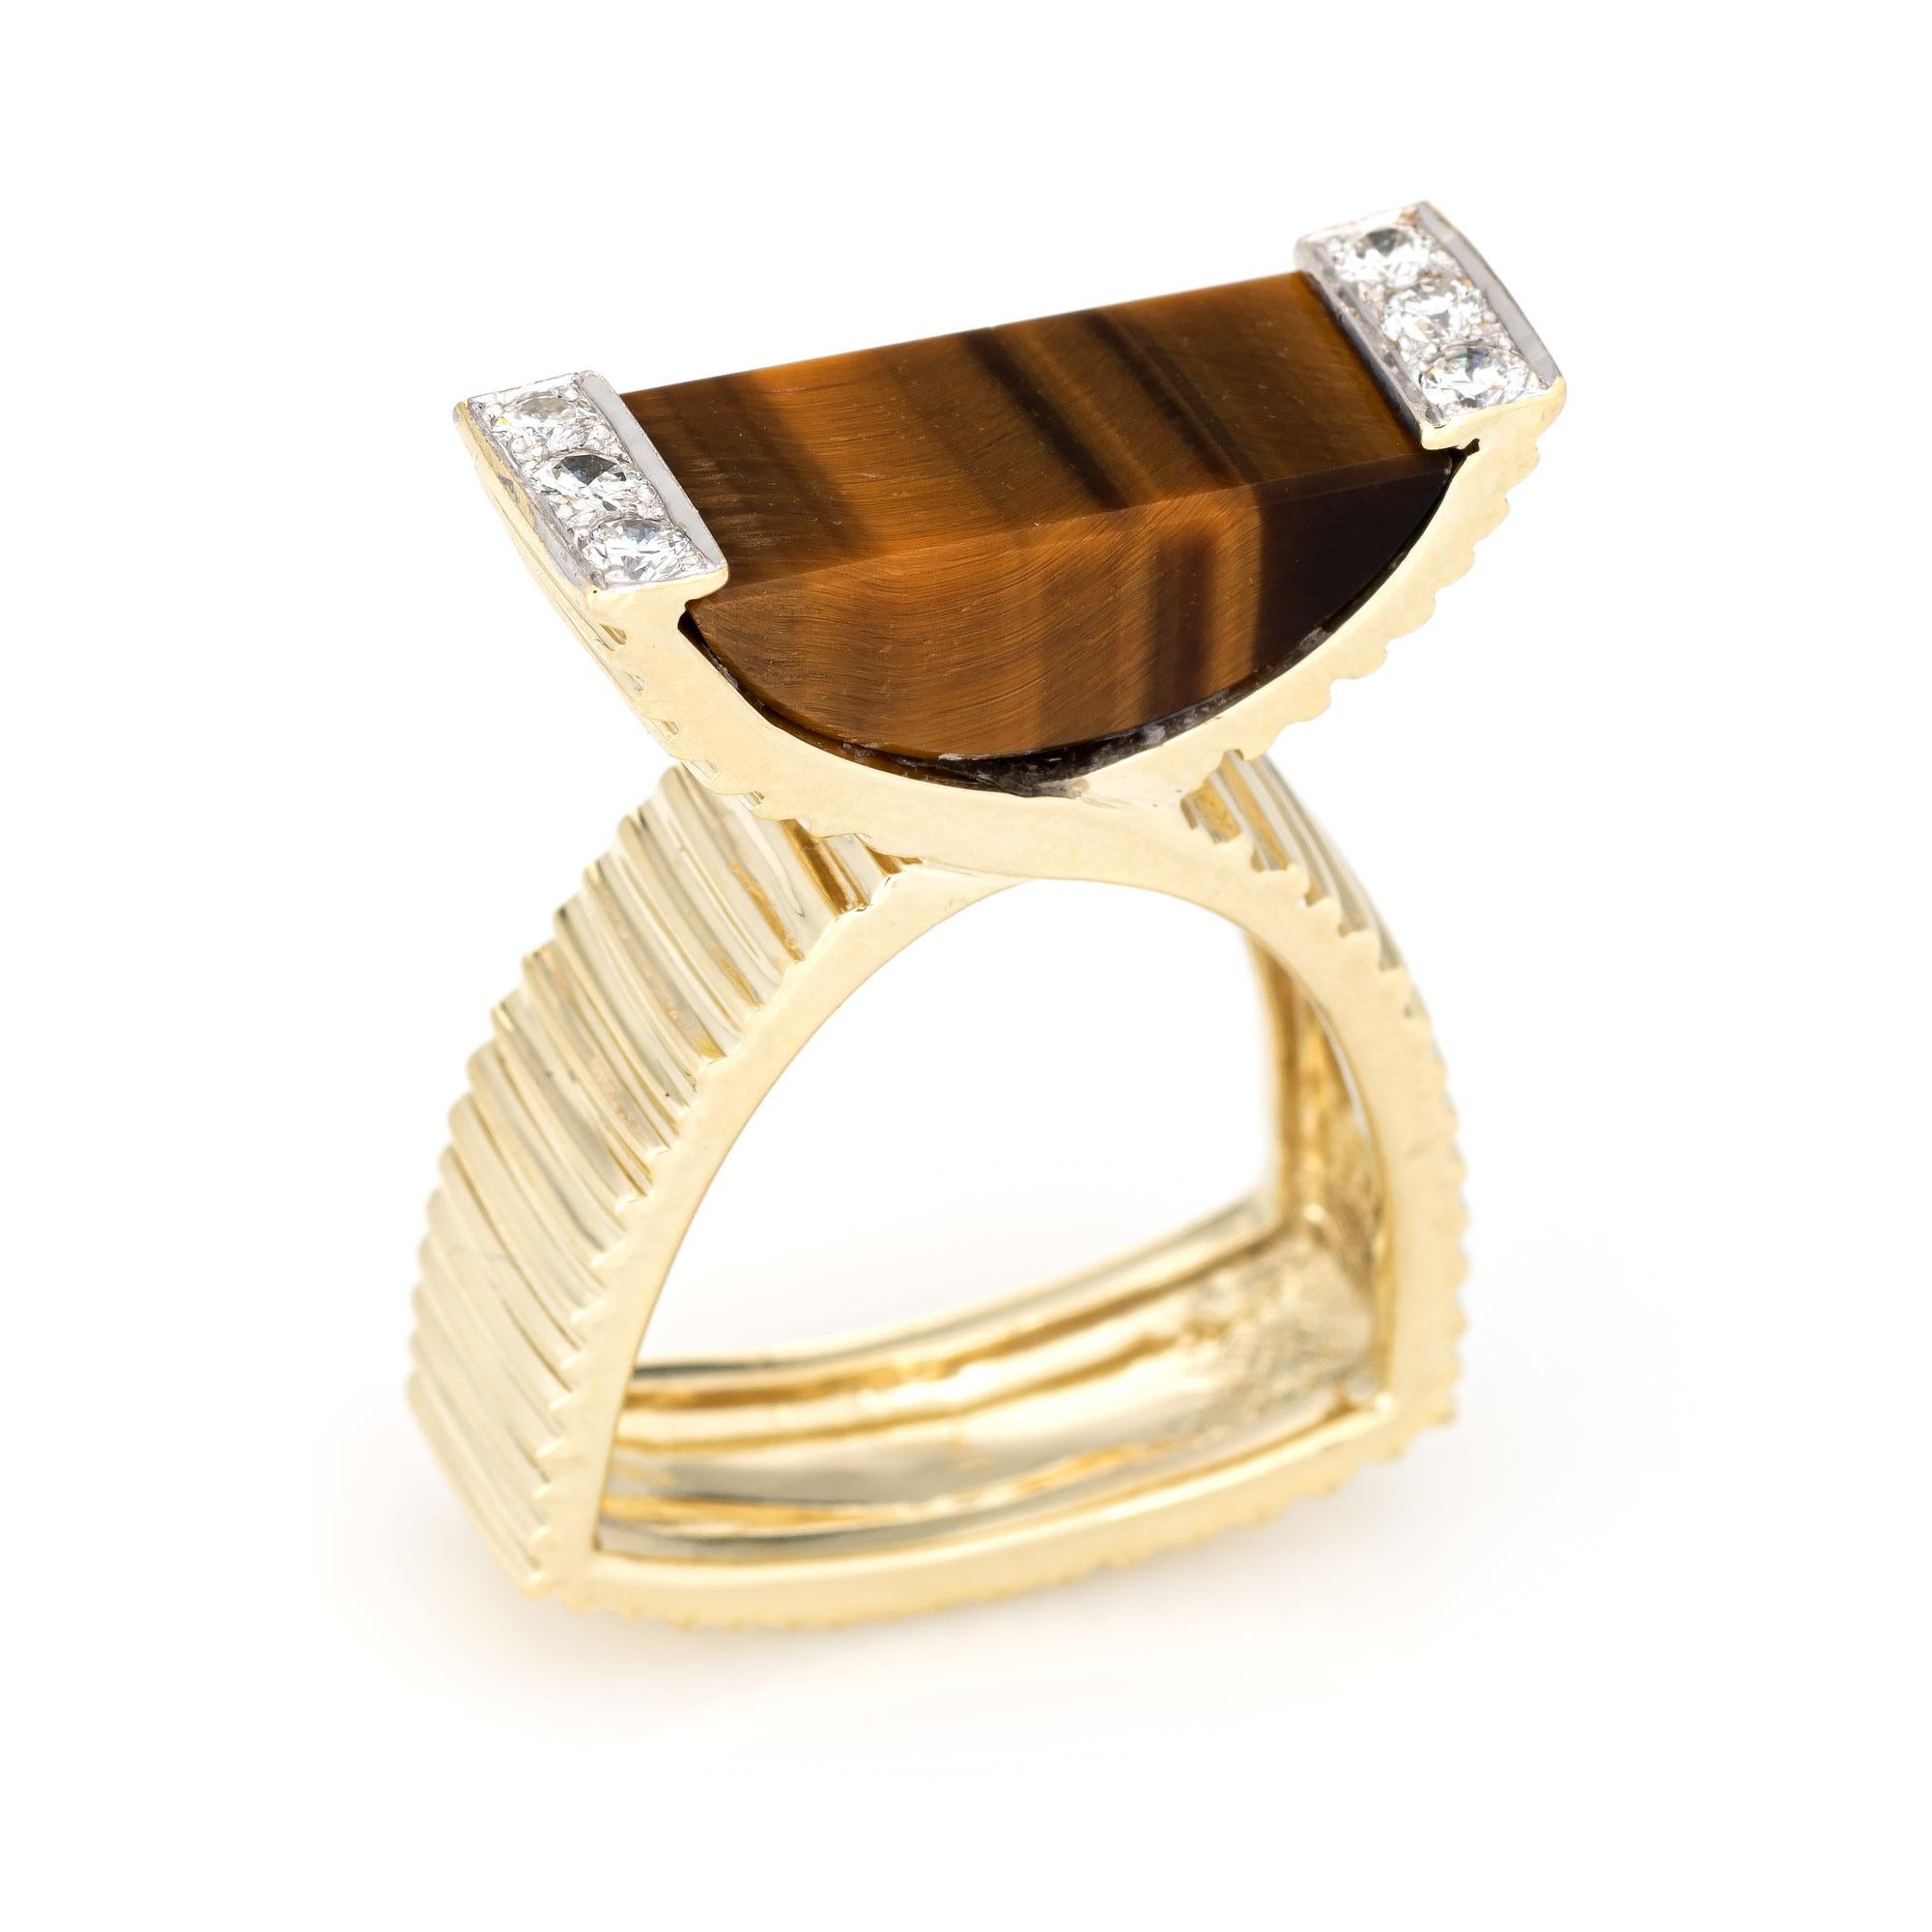 Stylish vintage tigers eye & diamond ring (circa 1970s) crafted in 14 karat yellow gold. 

Tigers eye measures 16mm x 8mm, accented with six diamonds totaling an estimated 0.30 carats (estimated at G-H color and VS2 clarity). The tigers eye is in